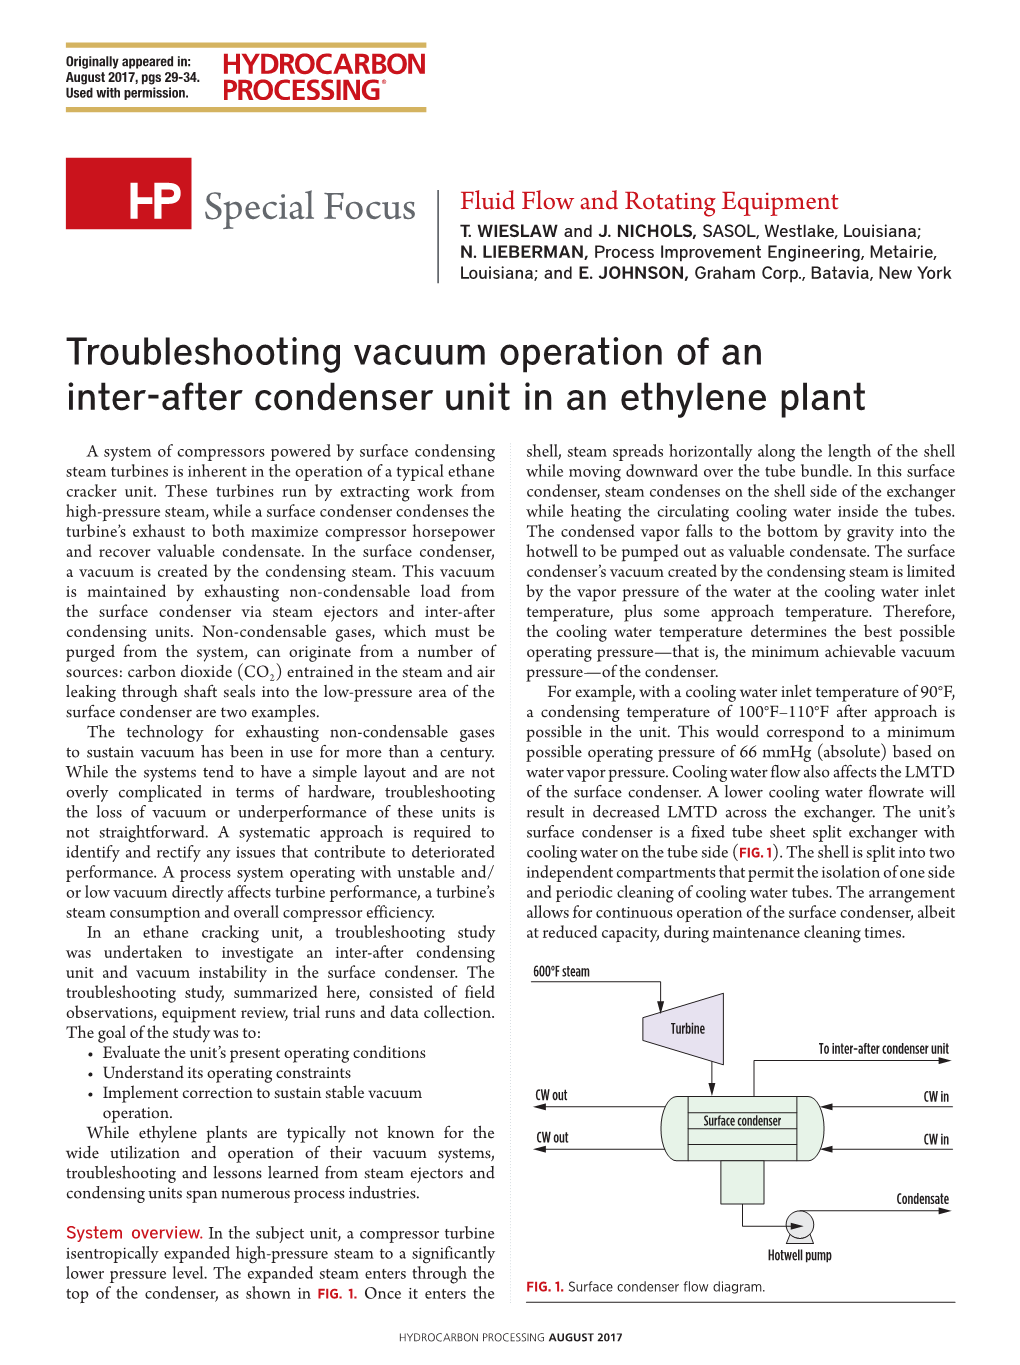 Troubleshooting Vacuum Operation of an Inter-After Condenser Unit in an Ethylene Plant